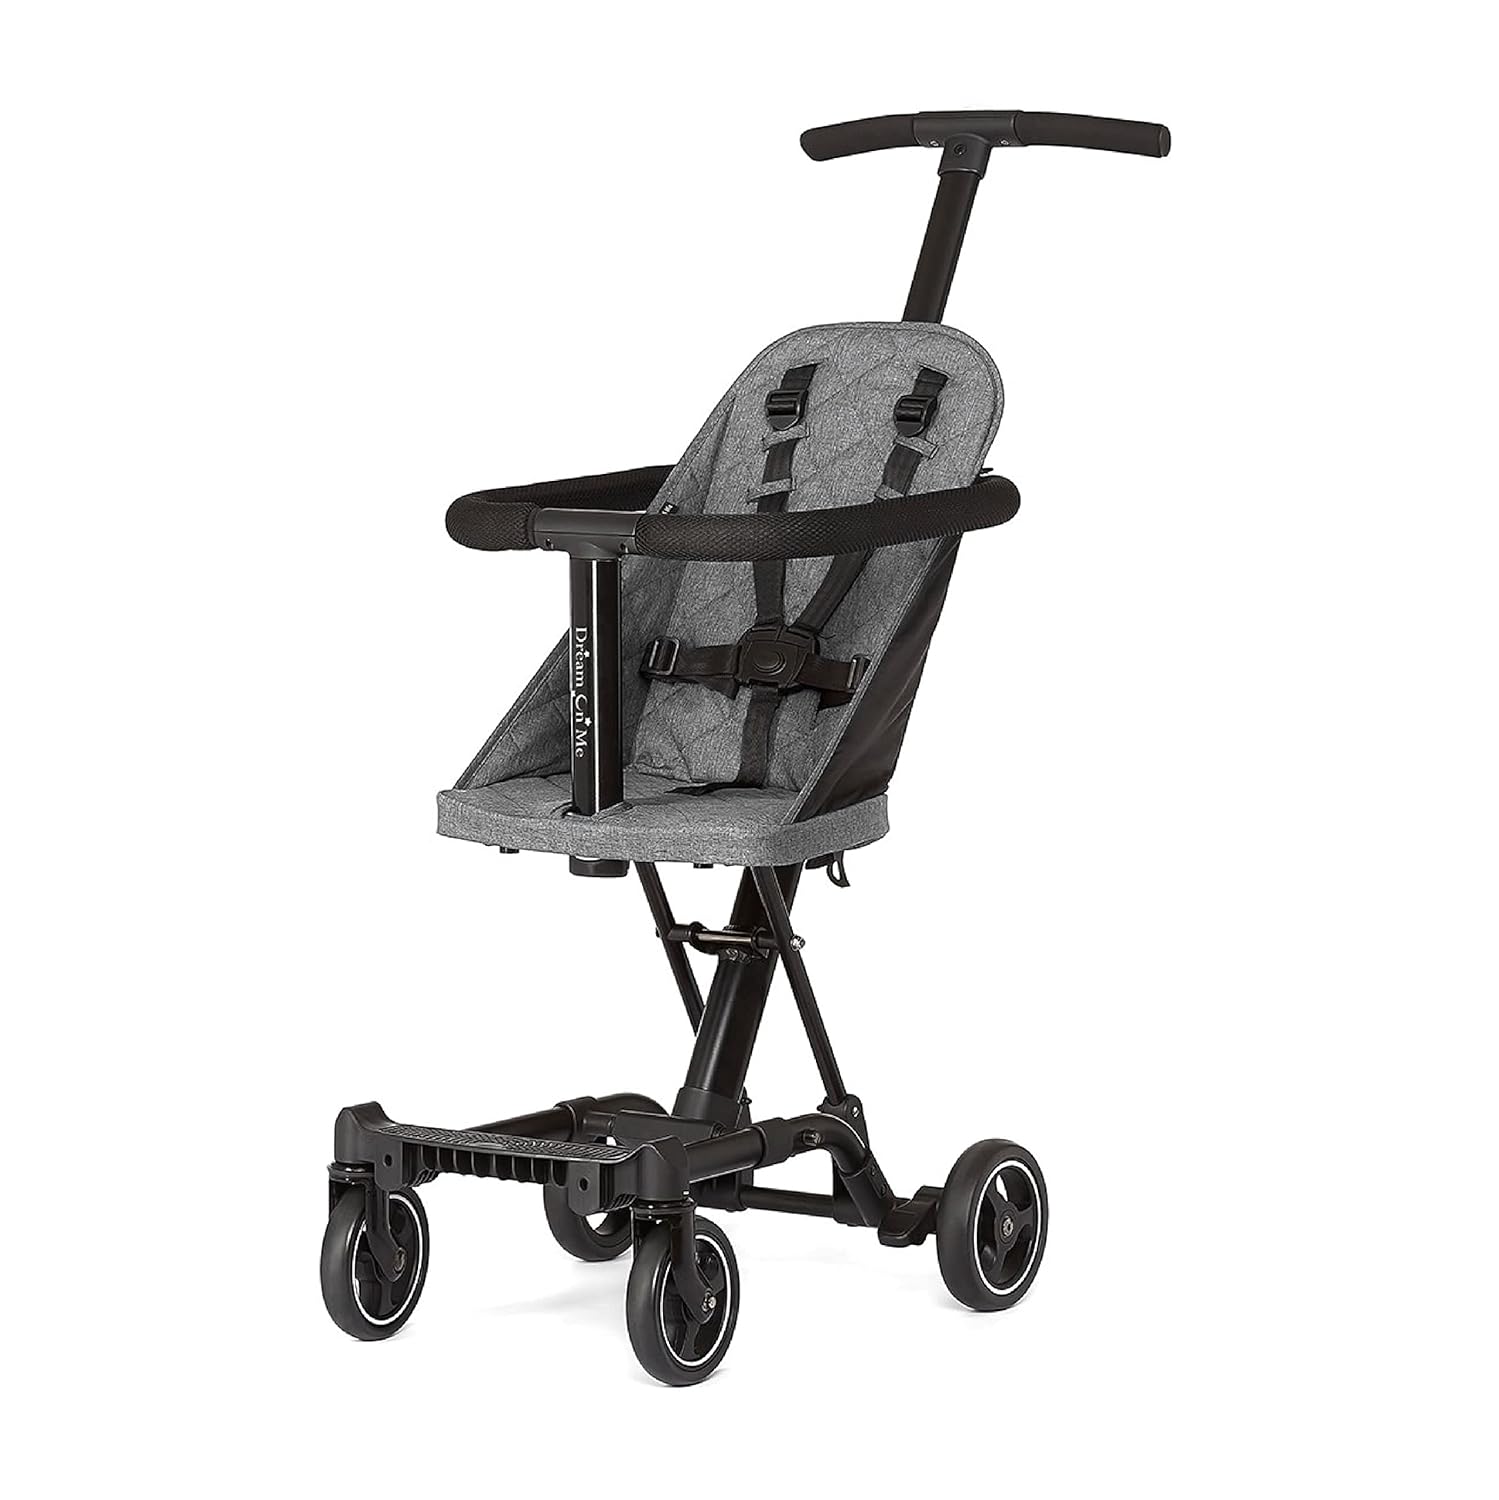 Dream On Me Lightweight And Compact Coast Rider Stroller With One Hand Easy Fold, Adjustable Handles And Soft Ride Wheels, Grey - image 1 of 5